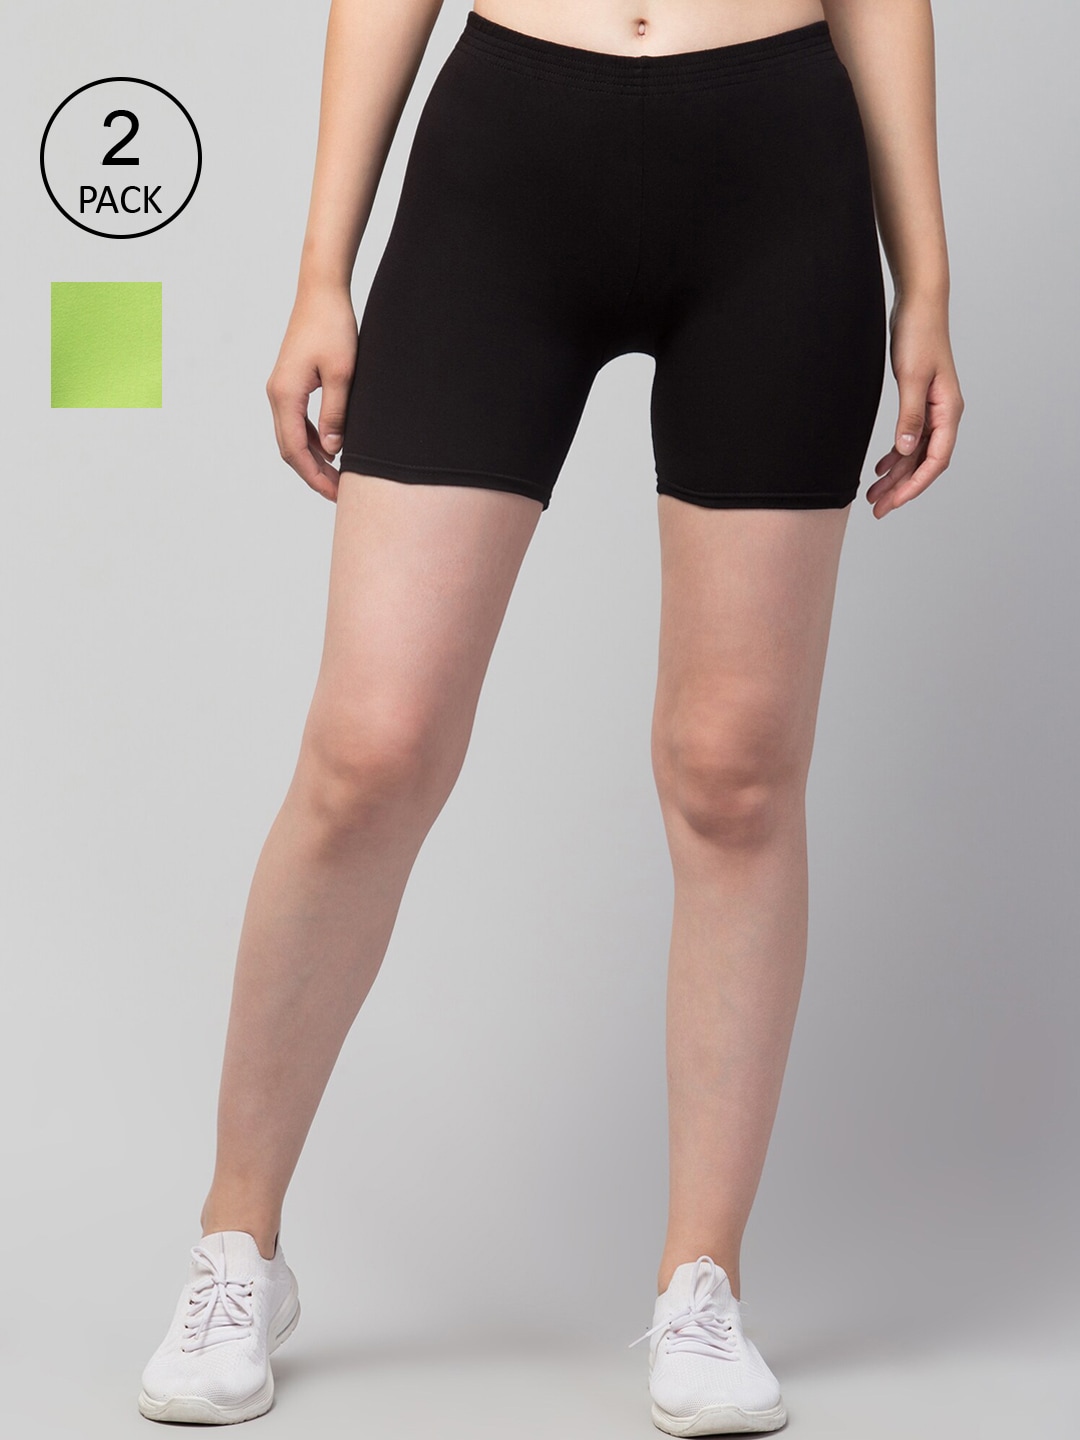 Apraa & Parma Women Set Of 2 Slim Fit Cycling Sports Shorts Price in India